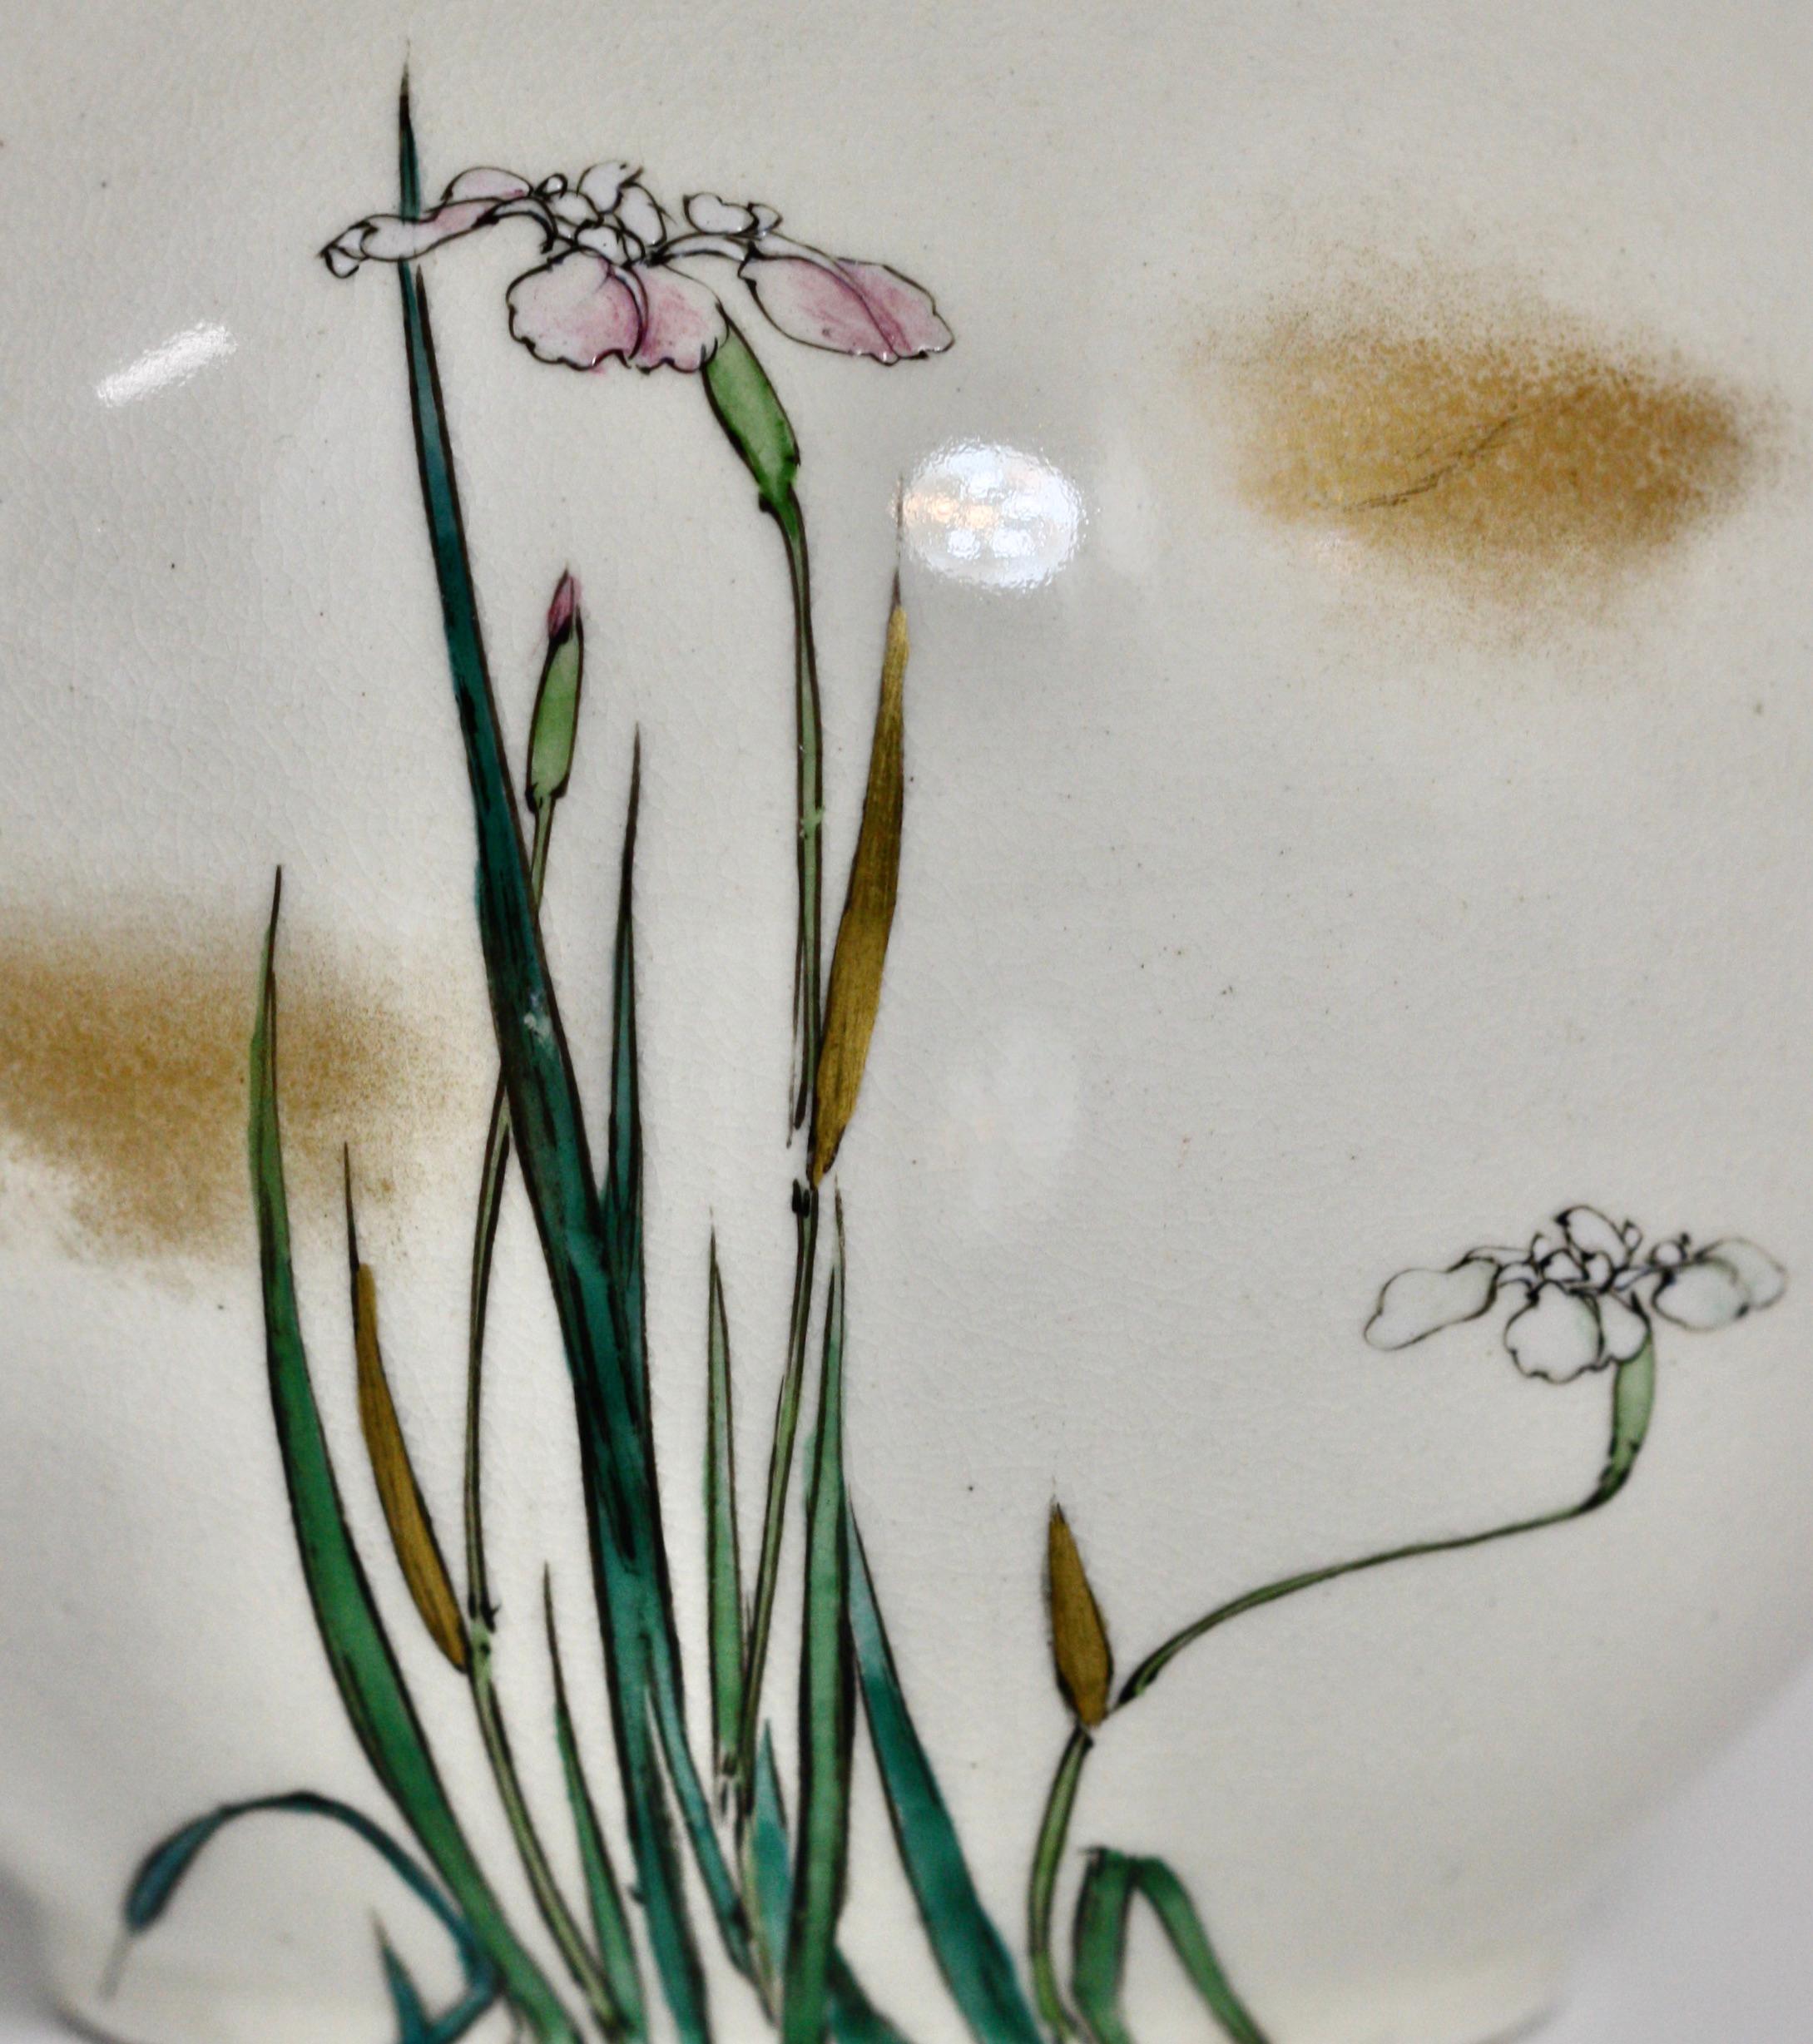 Kinkozan, Japanese Satsuma vase,
Meiji Period (1868-1912)
Of baluster form with an elongated neck decorated in polychrome enamels and gilt on a clear crackle glaze in an Art-Nouveau style of flowers and vines;
Signed Kinkozan with an impressed